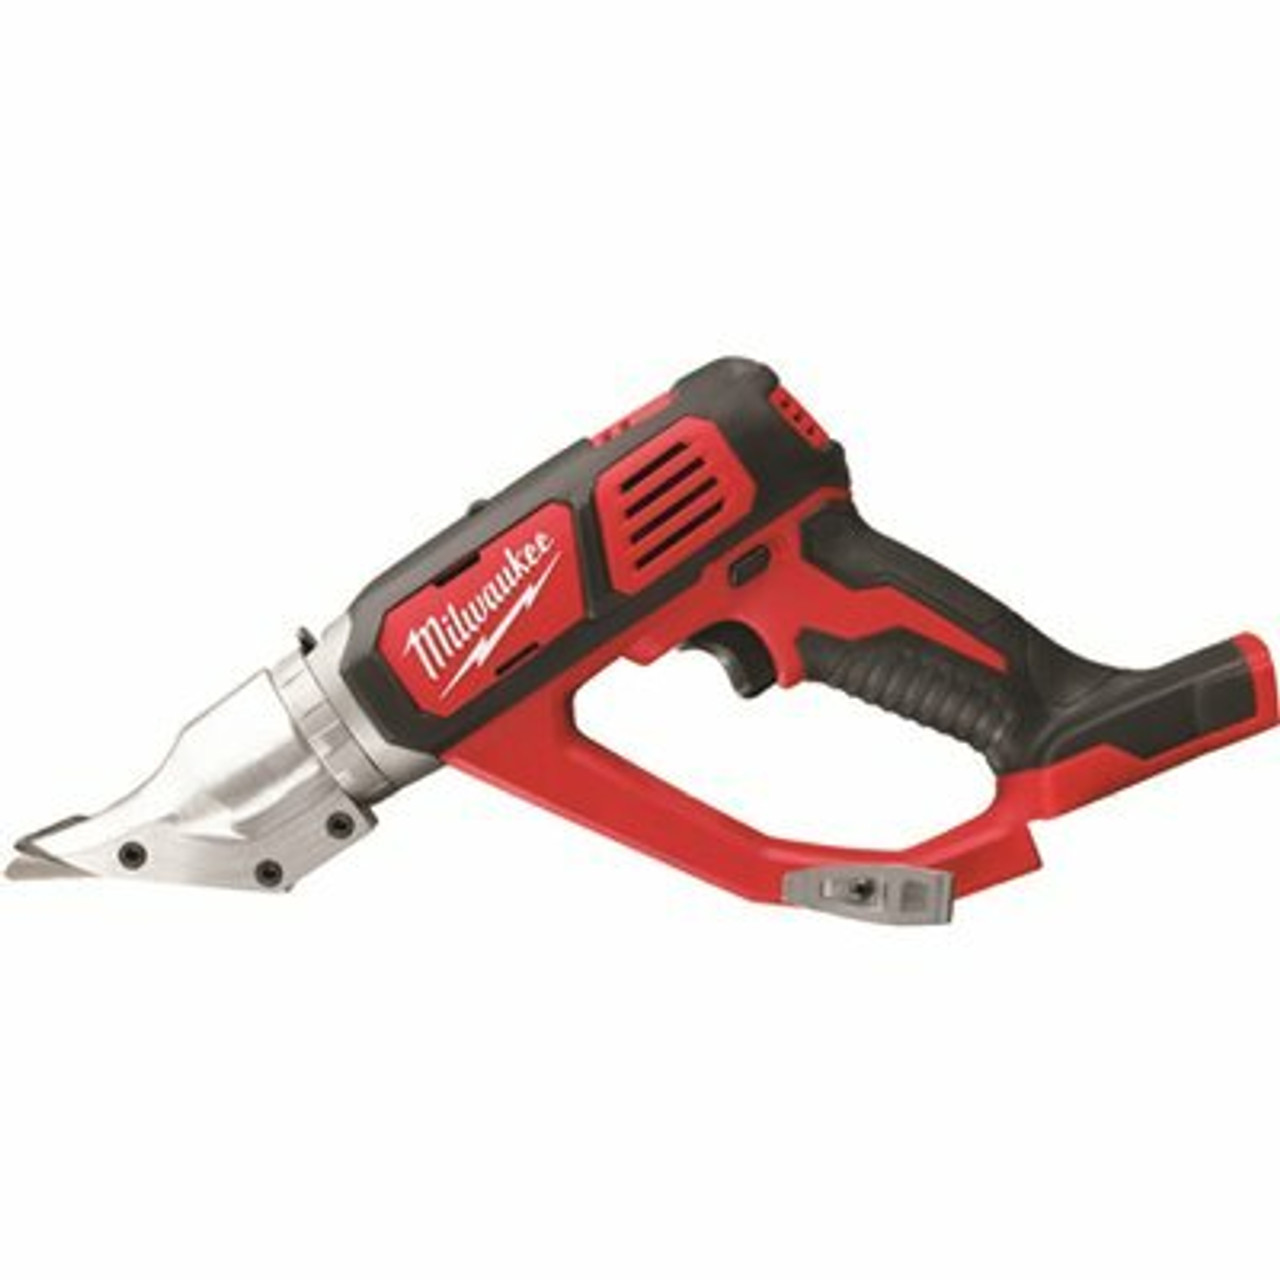 Milwaukee M18 18-Volt Lithium-Ion Cordless 18-Gauge Double Cut Metal Shear (Tool-Only)